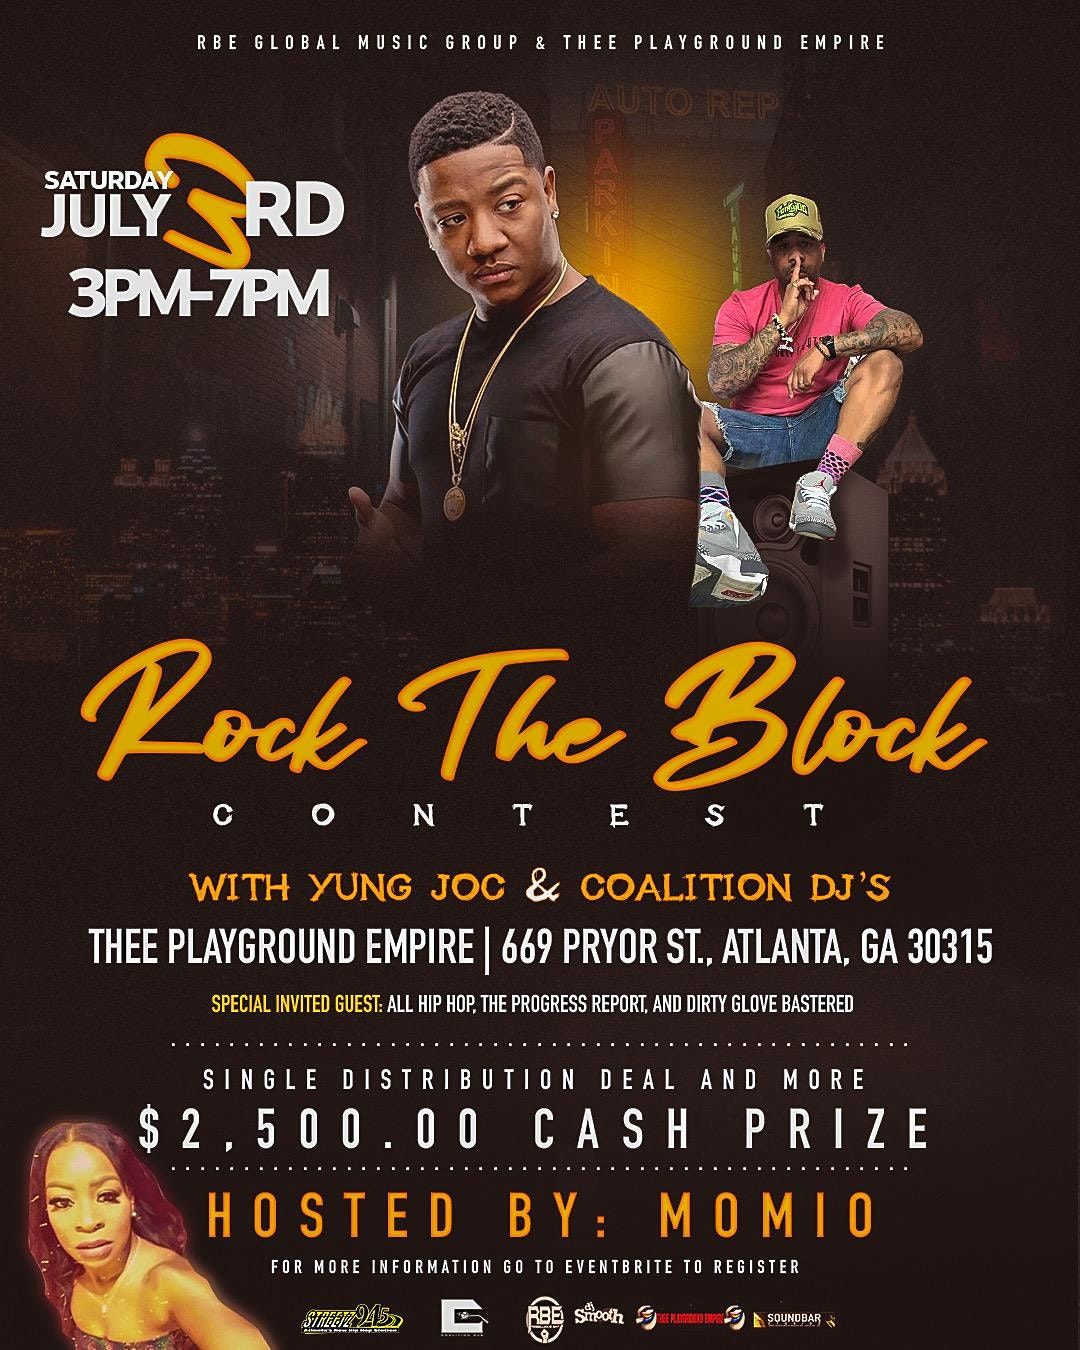 Rock The Block with Yung Joc & The Coalition Djs